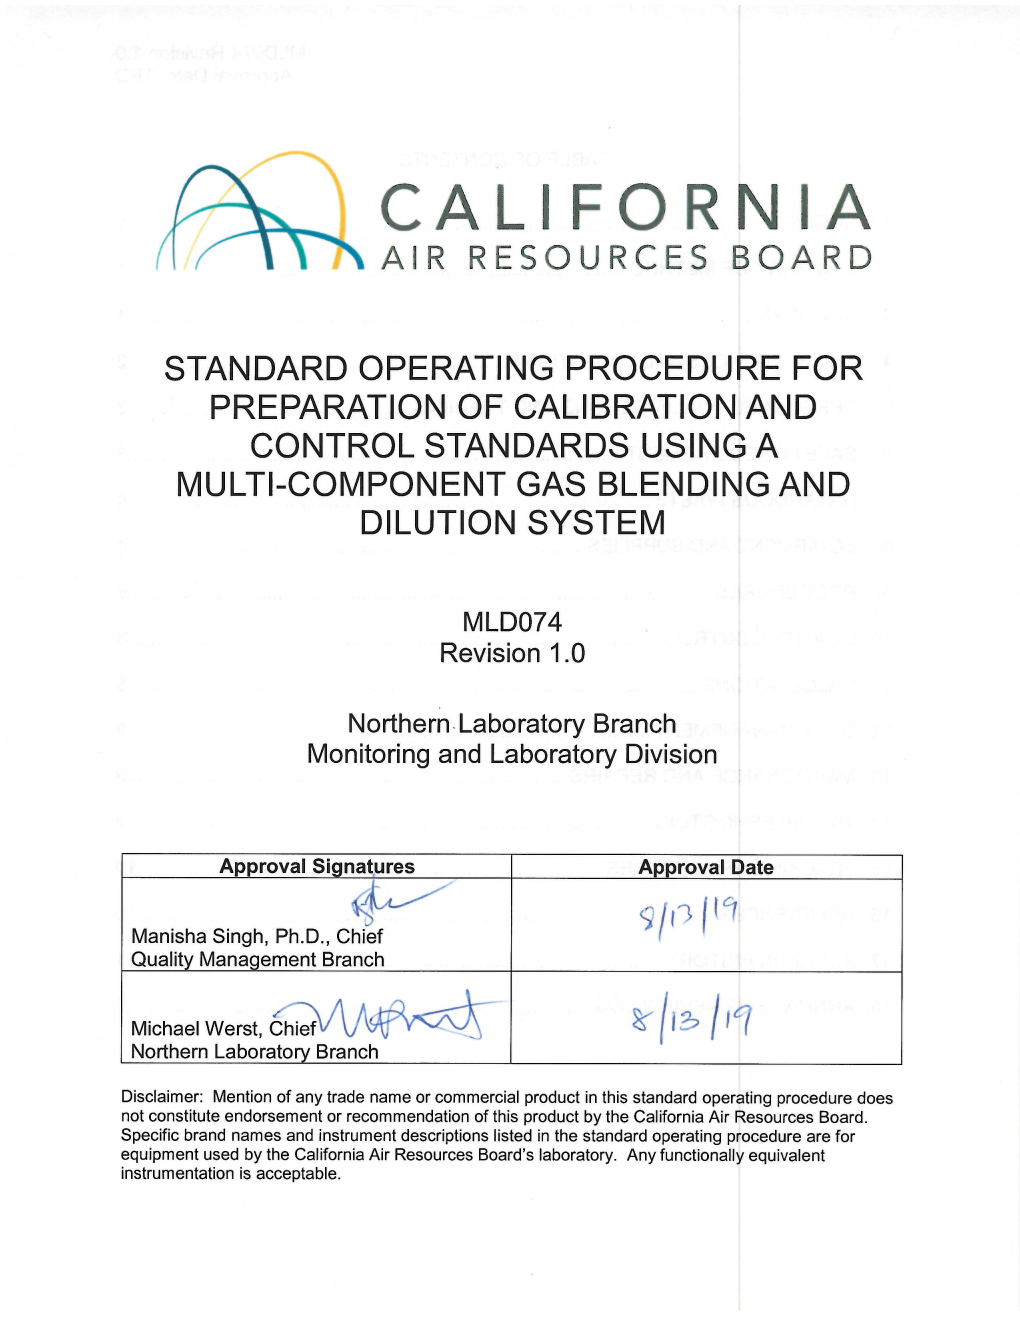 Preparation of Calibration and Control Standards Using a Multi-Component Gas Blending and Dilution System